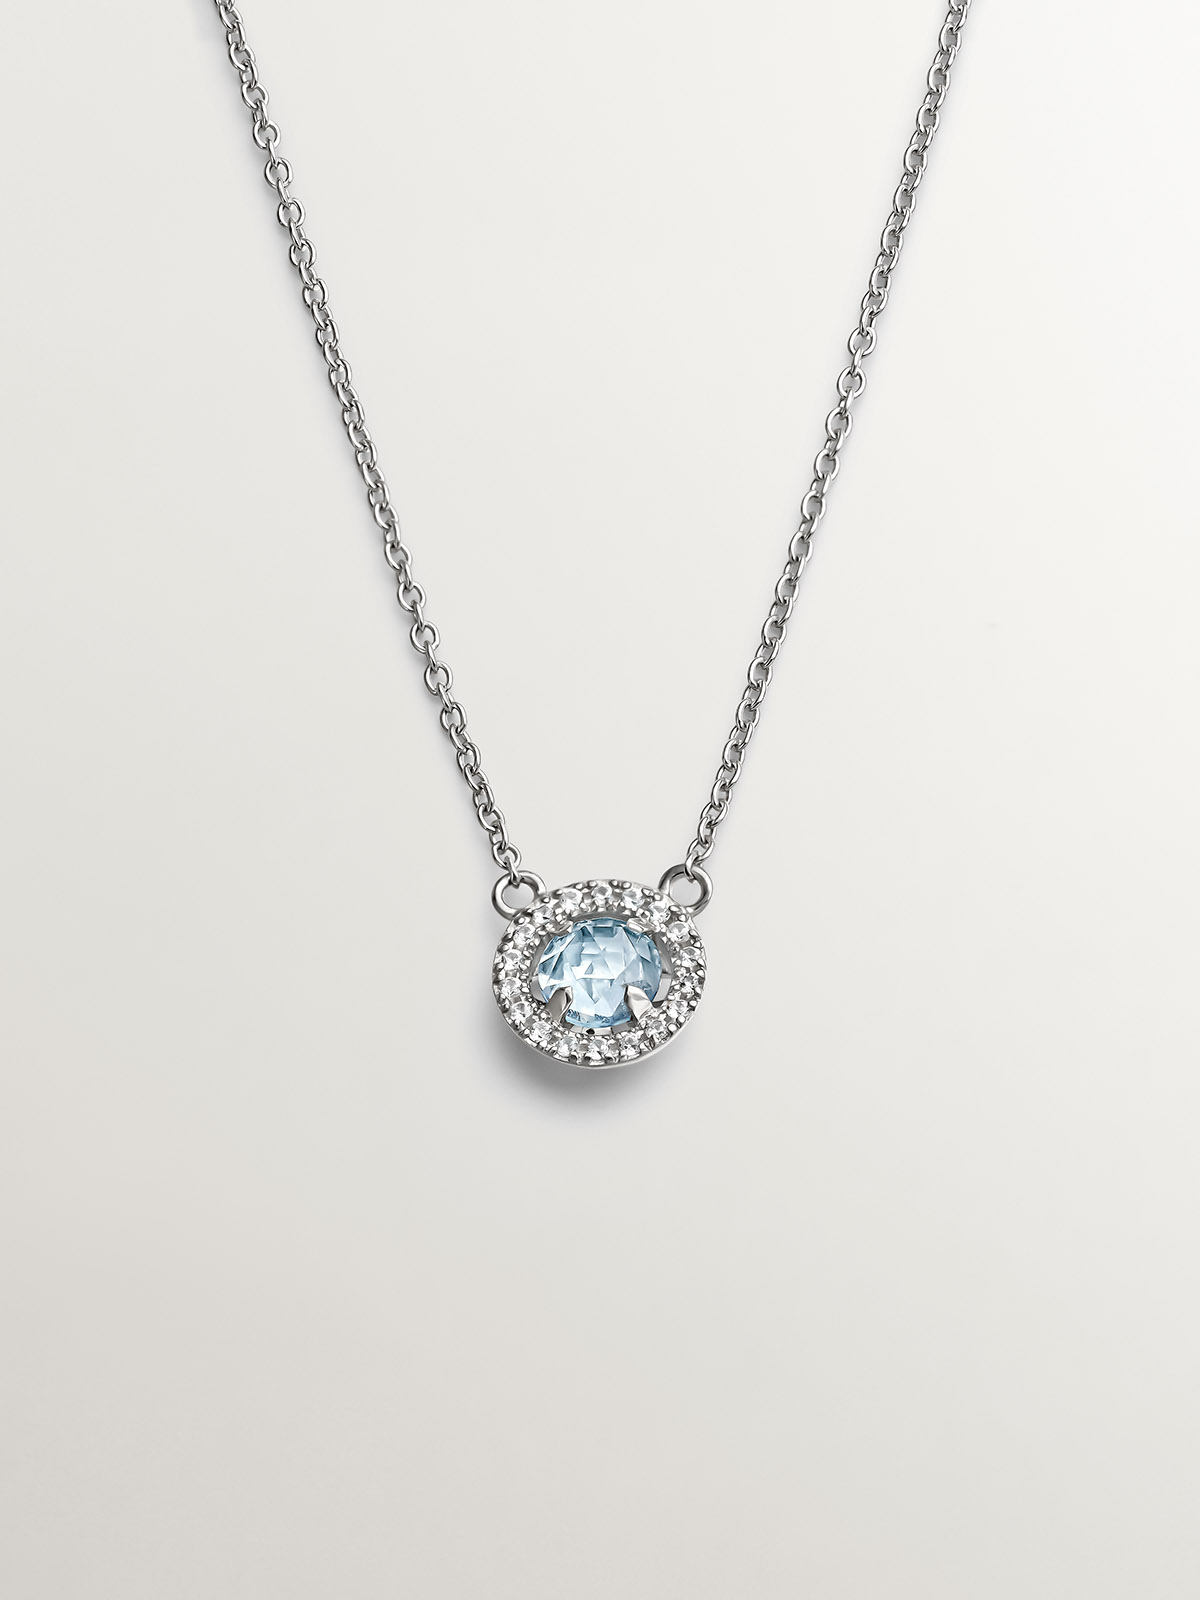 925 Silver necklace with blue topaz and white sapphires.